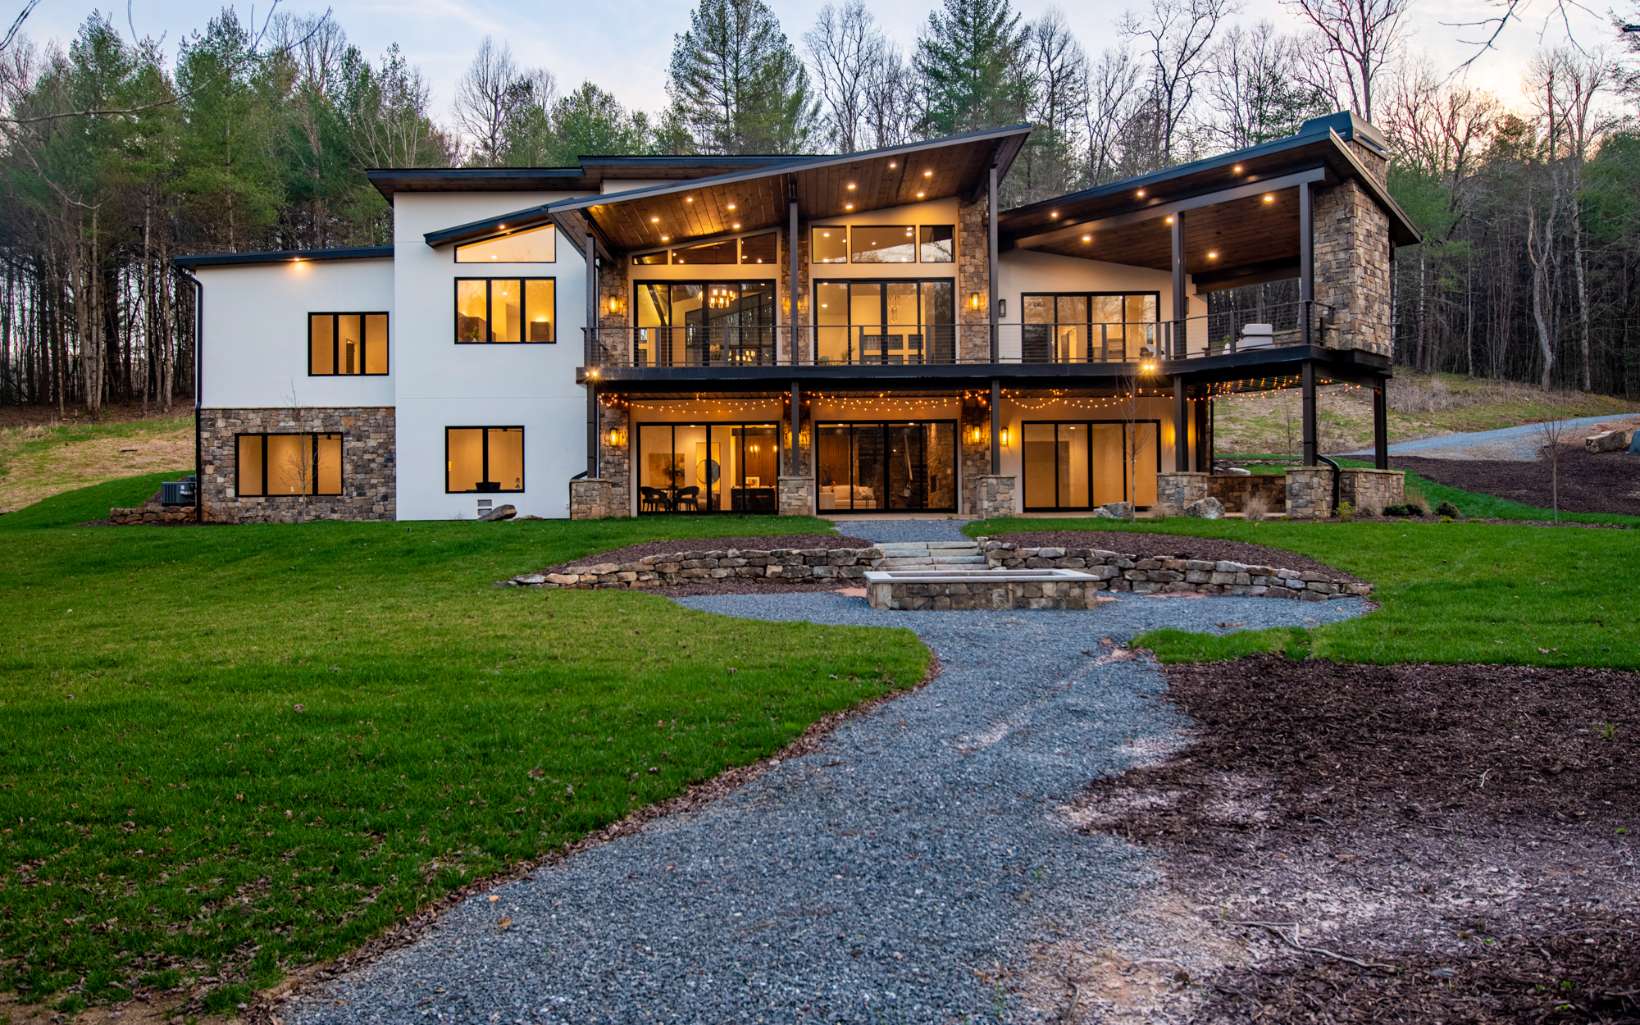 This new construction home is a stunning example of mountain modern architecture, boasting 4 spacious bedrooms, 3 full & 2 half bathrooms. Situated on 3 acres w/ 439 feet of Fightingtown Creek frontage (add'l 14.35 acres & creek frontage available). One standout feature of this property is the extensive use of steel I-beams throughout the home, which adds a modern and industrial aesthetic to the design. The use of maintenance-free materials throughout the property means that the home requires minimal upkeep. The home is filled with natural light and has high-end appliances & fixtures, quartz countertops, imported Italian porcelain tile & wide plank-engineered hardwood floors on both the upper and lower levels. Built by highly-regarded builder Tommy Wosyluk, the combination of his expertise and the home's outstanding design and finishes make this property a truly unique & one-of-a-kind!